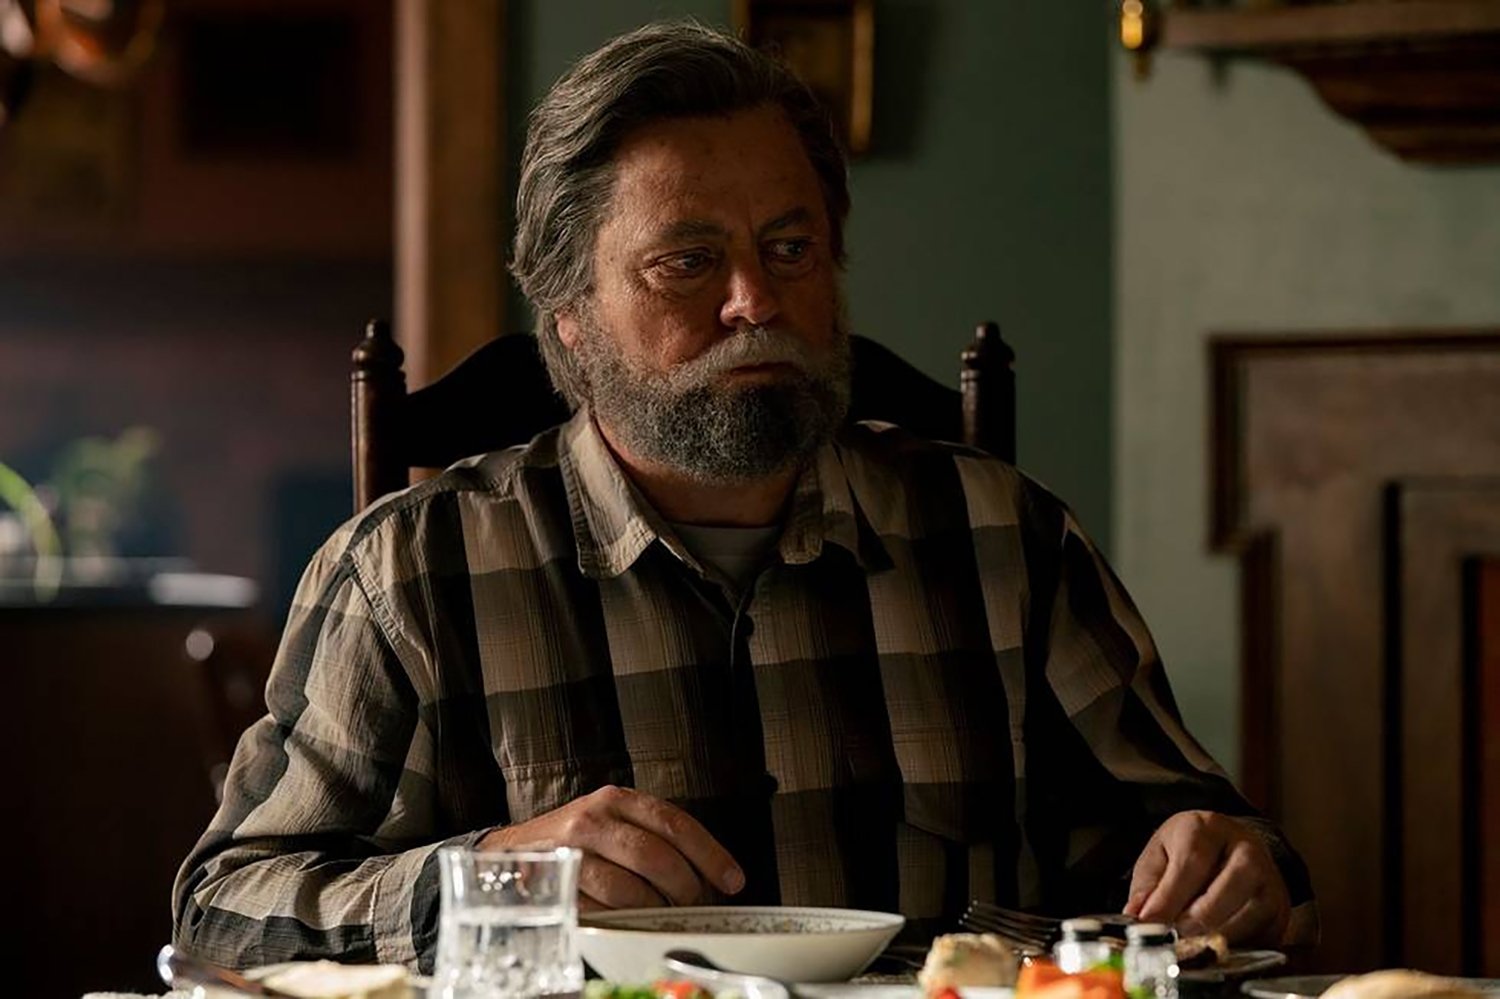 Last of Us Episode 3 Trailer Teases Nick Offerman & Murray